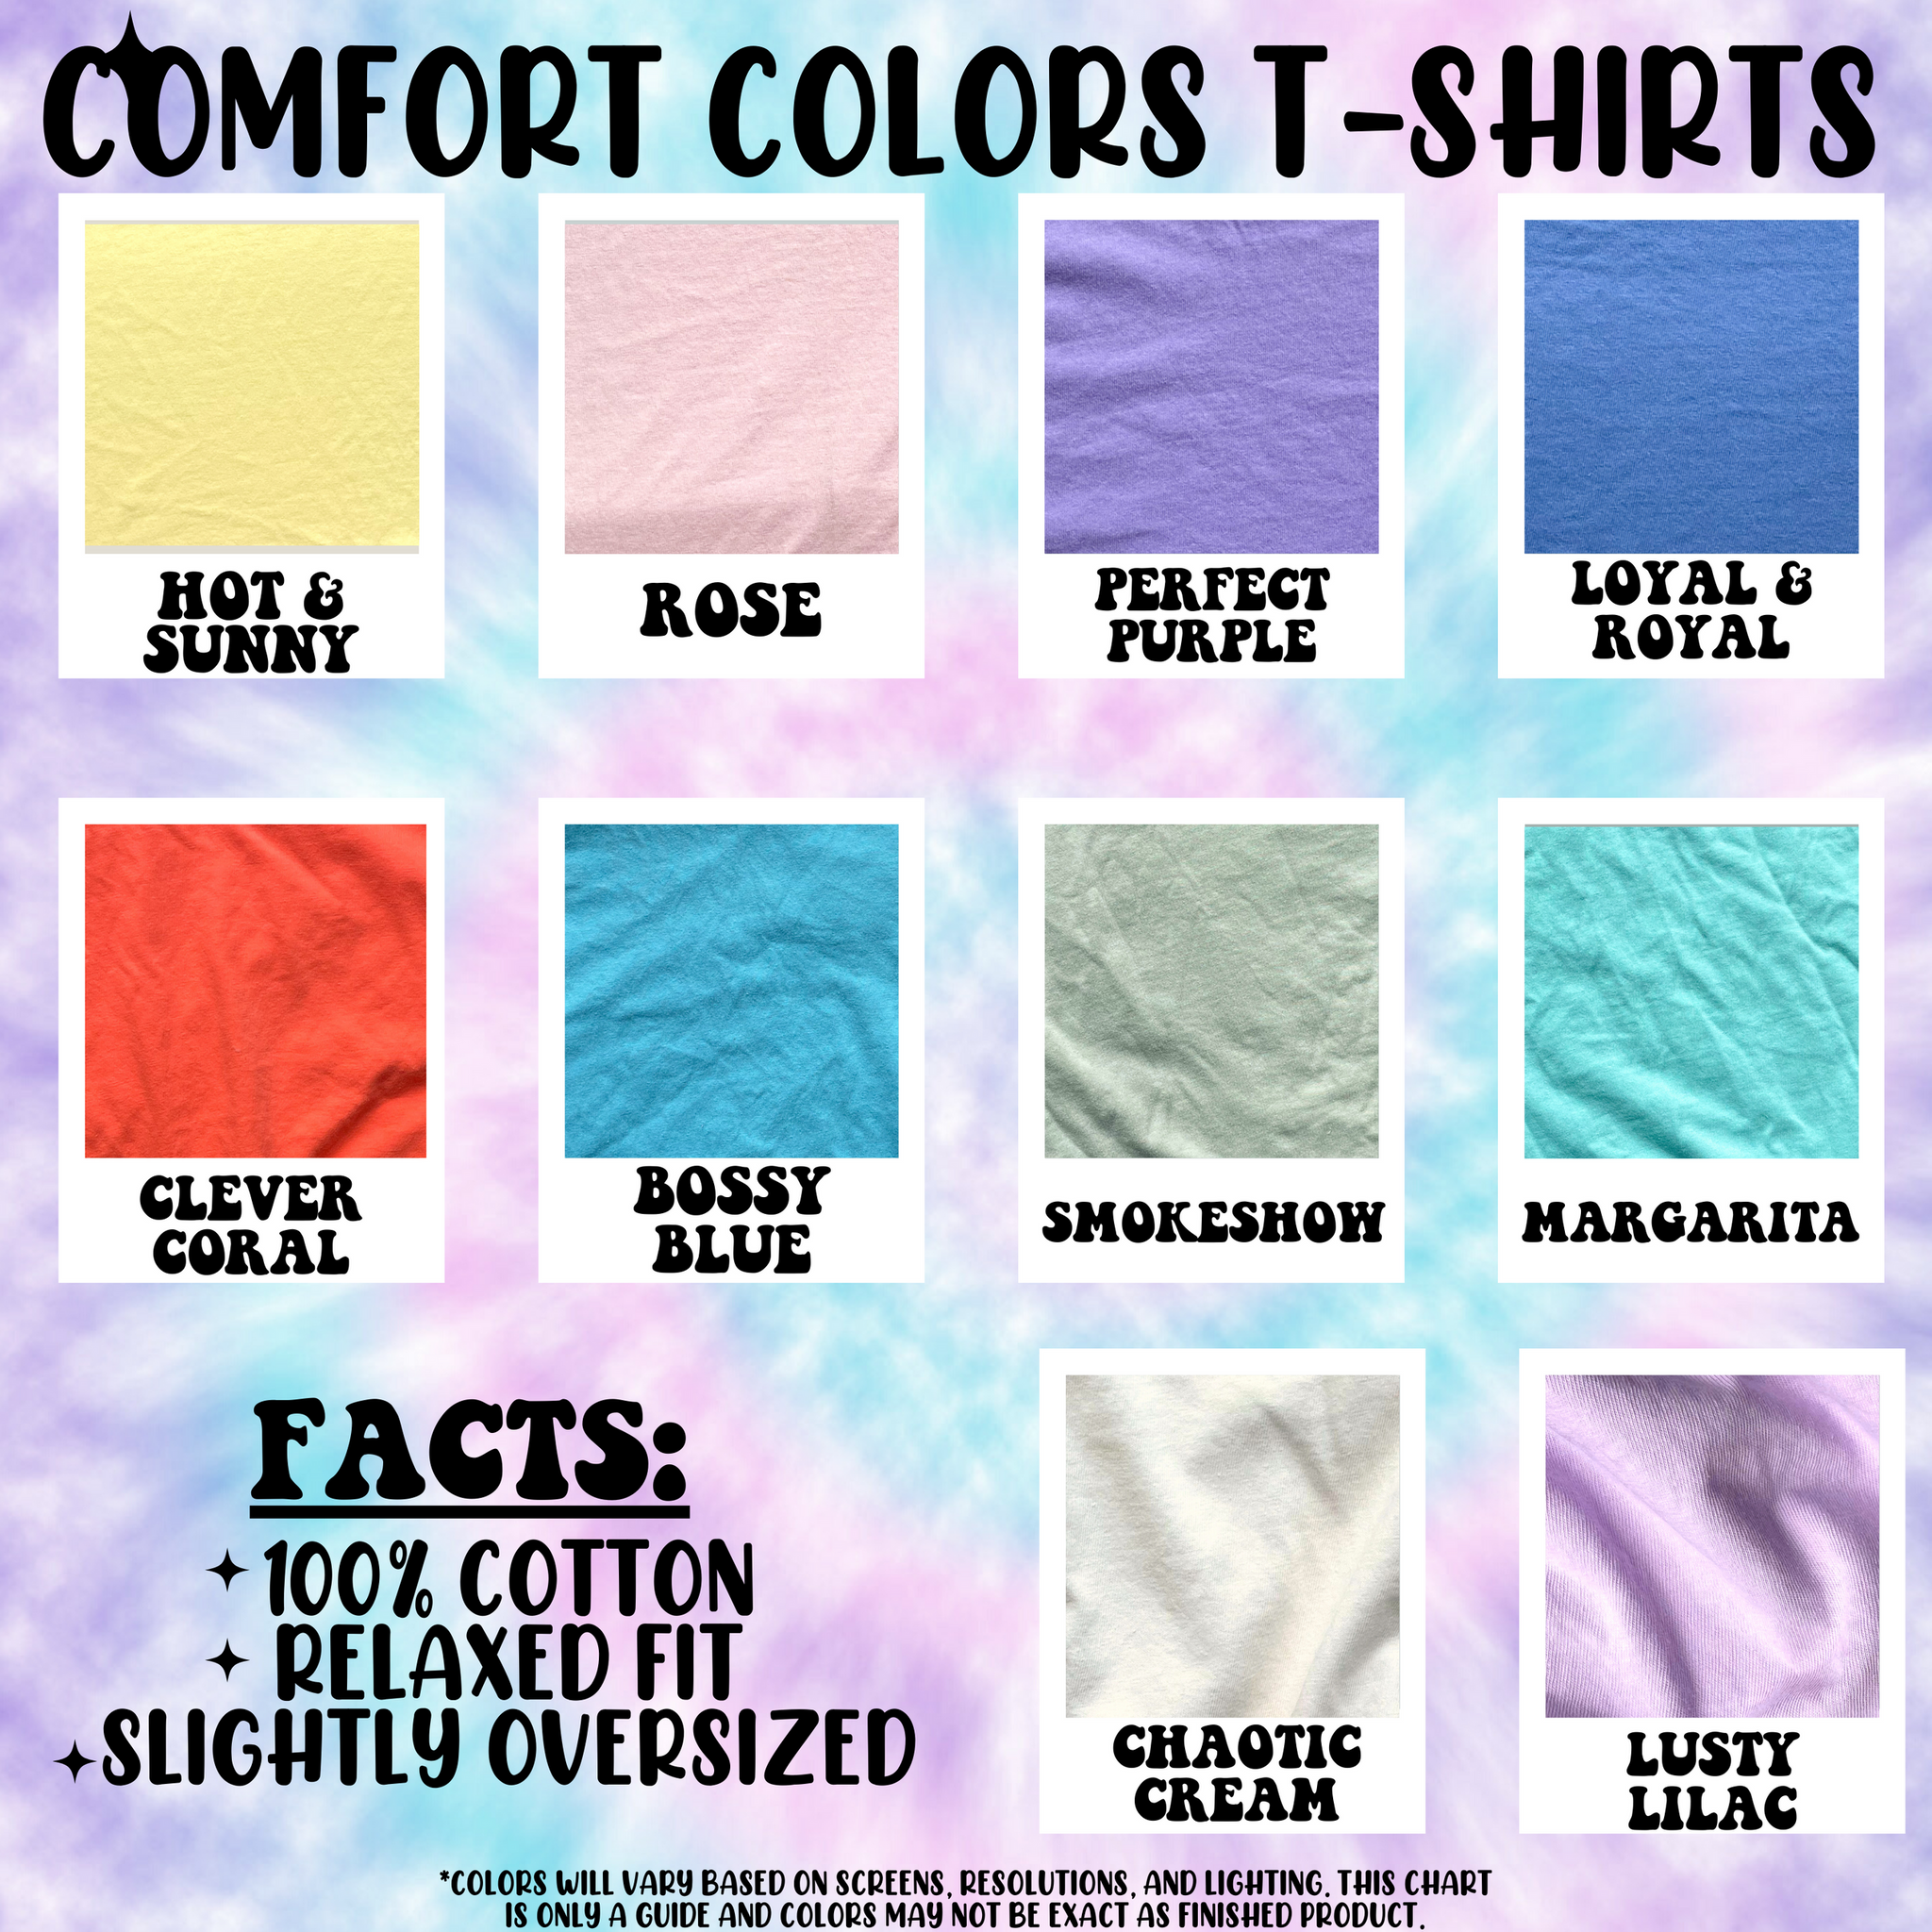 You are a Headache Comfort Colors Tee*